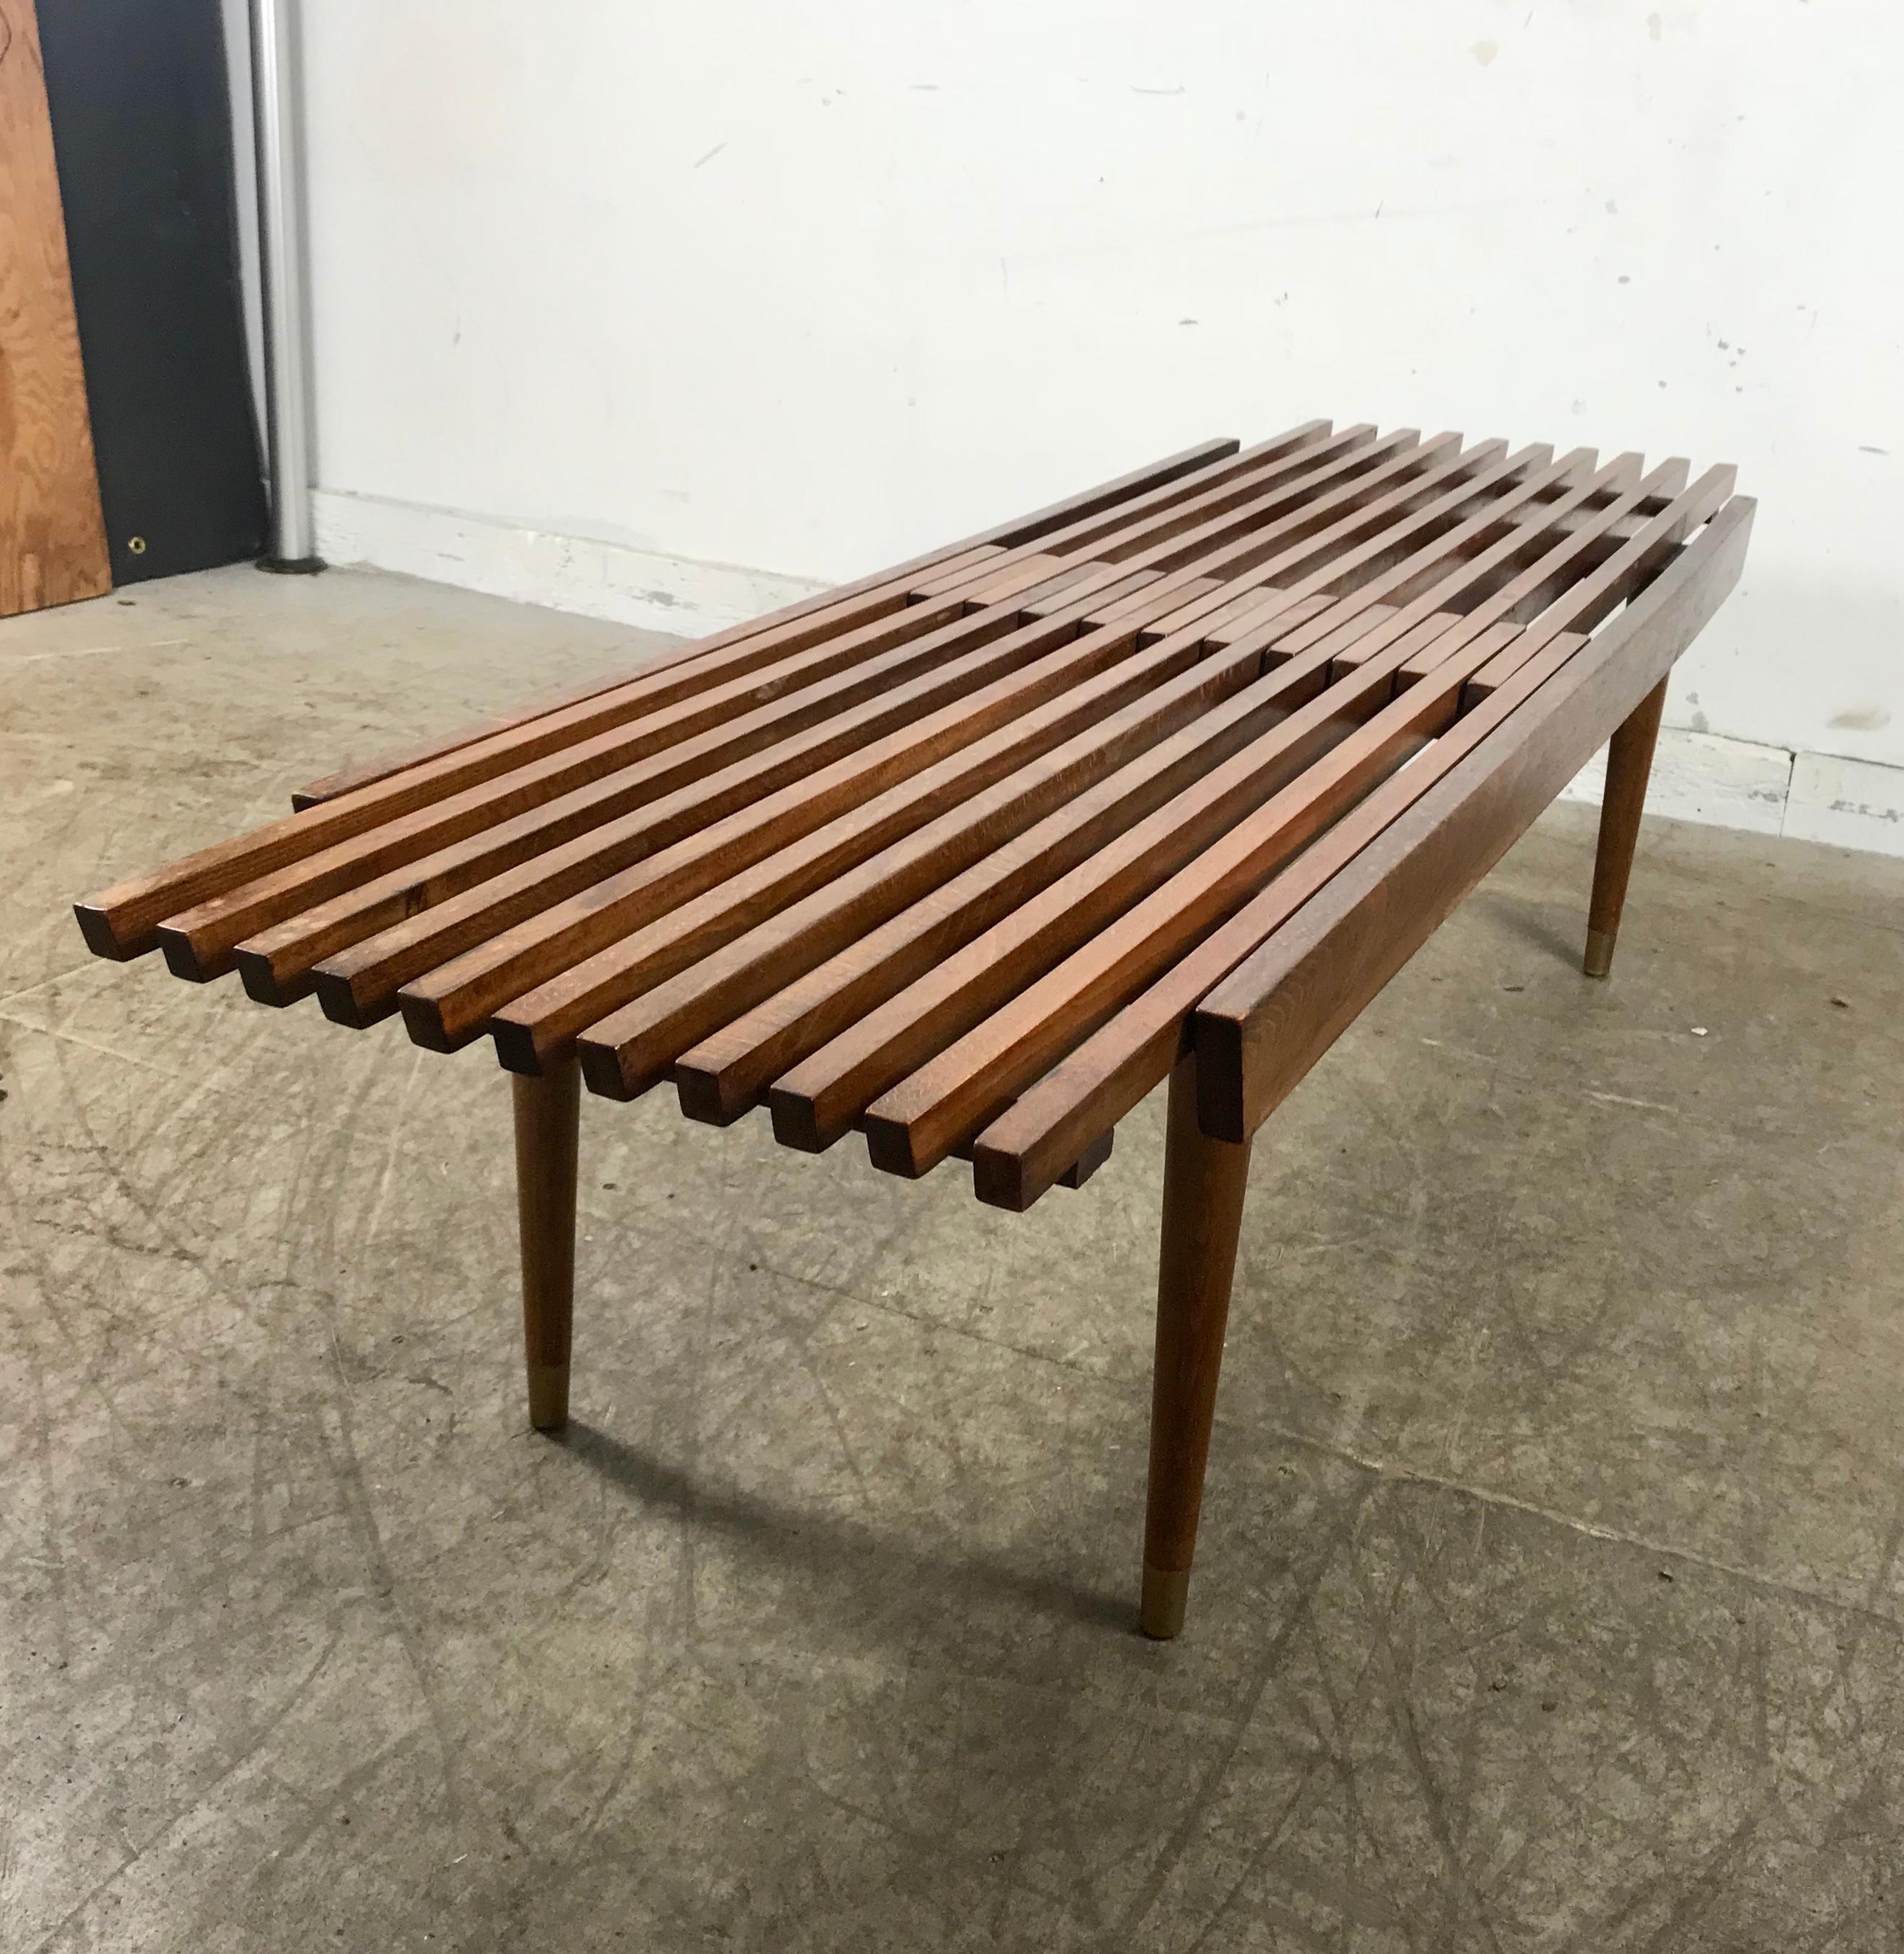 Classic Mid-Century Modern walnut expandable slat bench or table, retains original warm walnut finish and patina, structurally sound, sturdy design, quality construction.